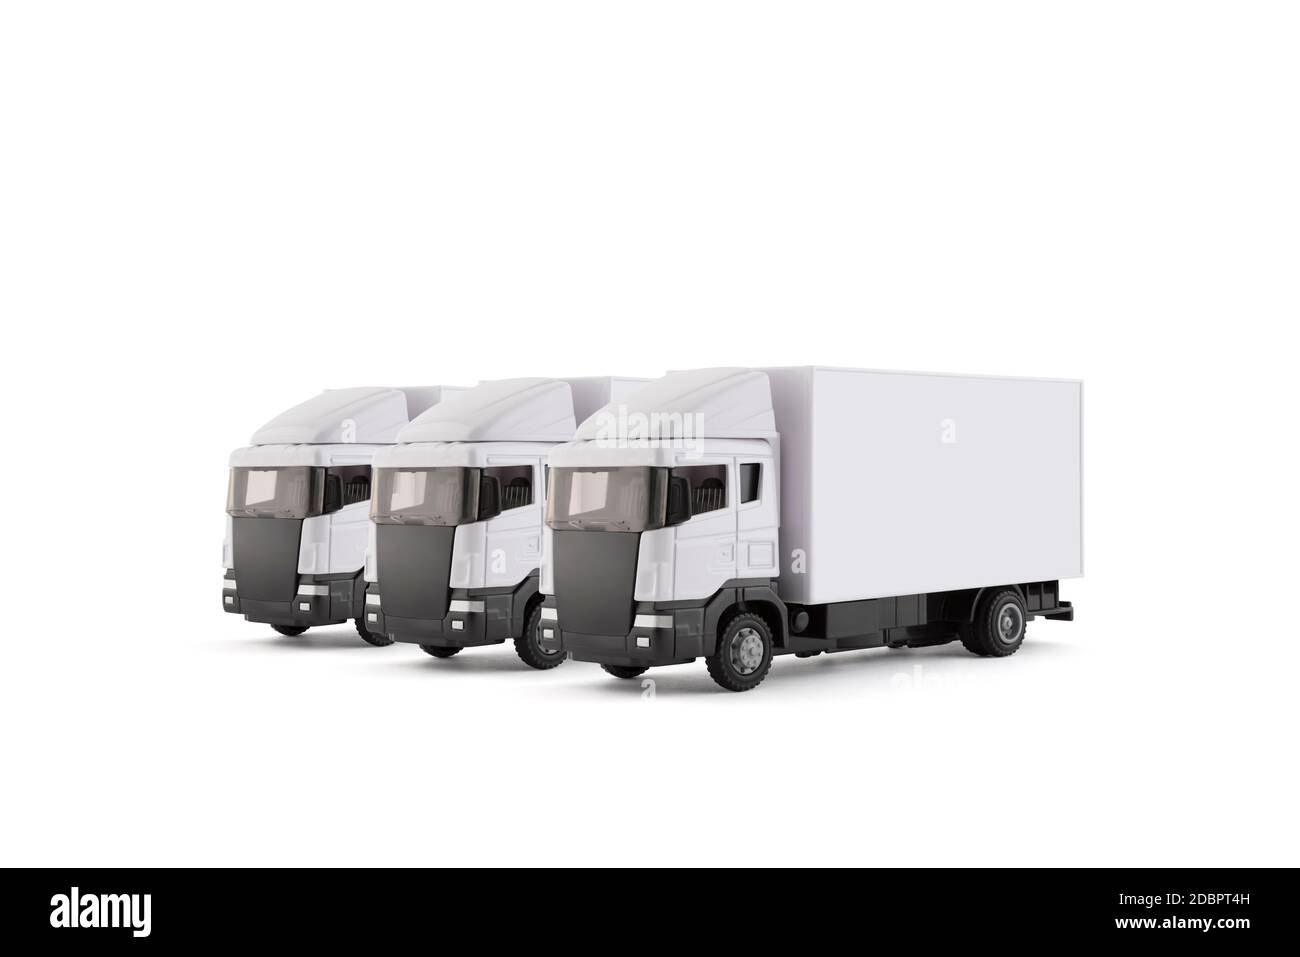 Group of three white cargo delivery trucks isolated on white background Stock Photo